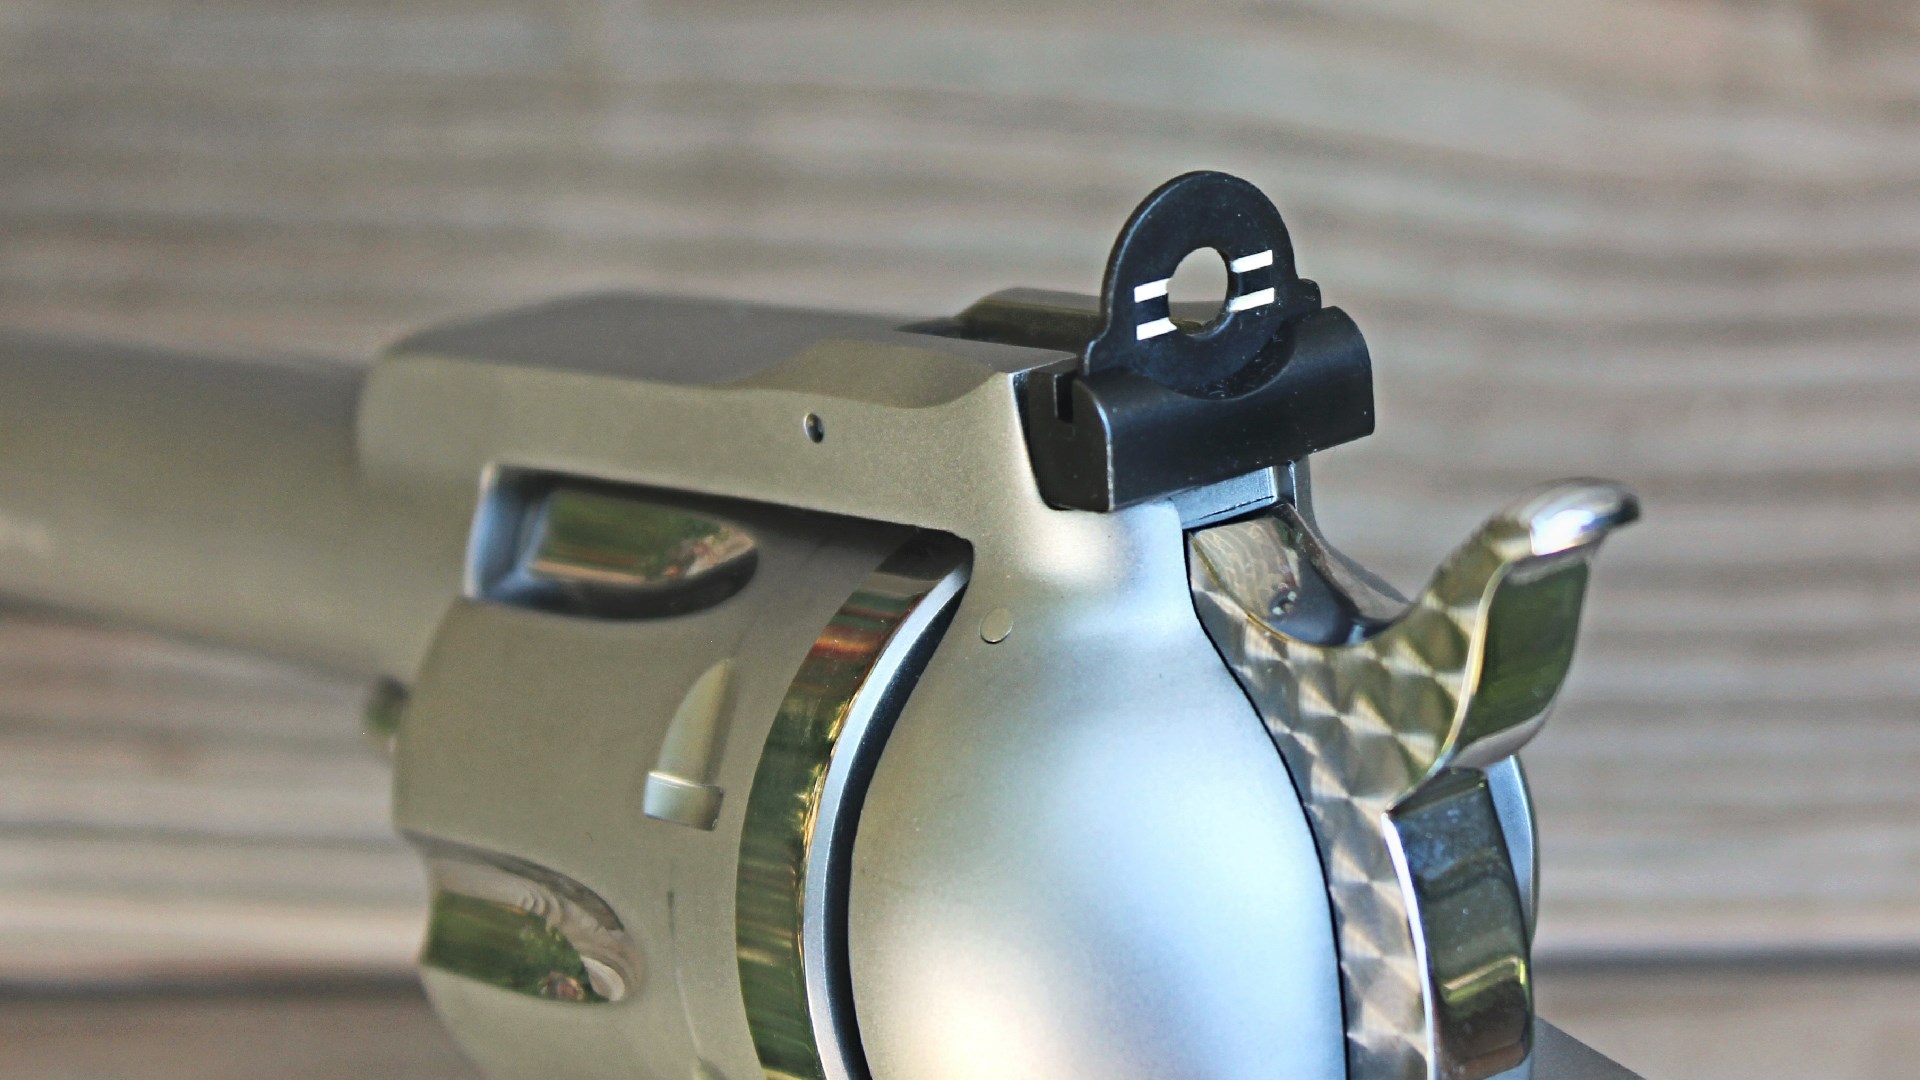 The Omega peep sight allows for the sight picture to be adjusted up or down depending on target distance.